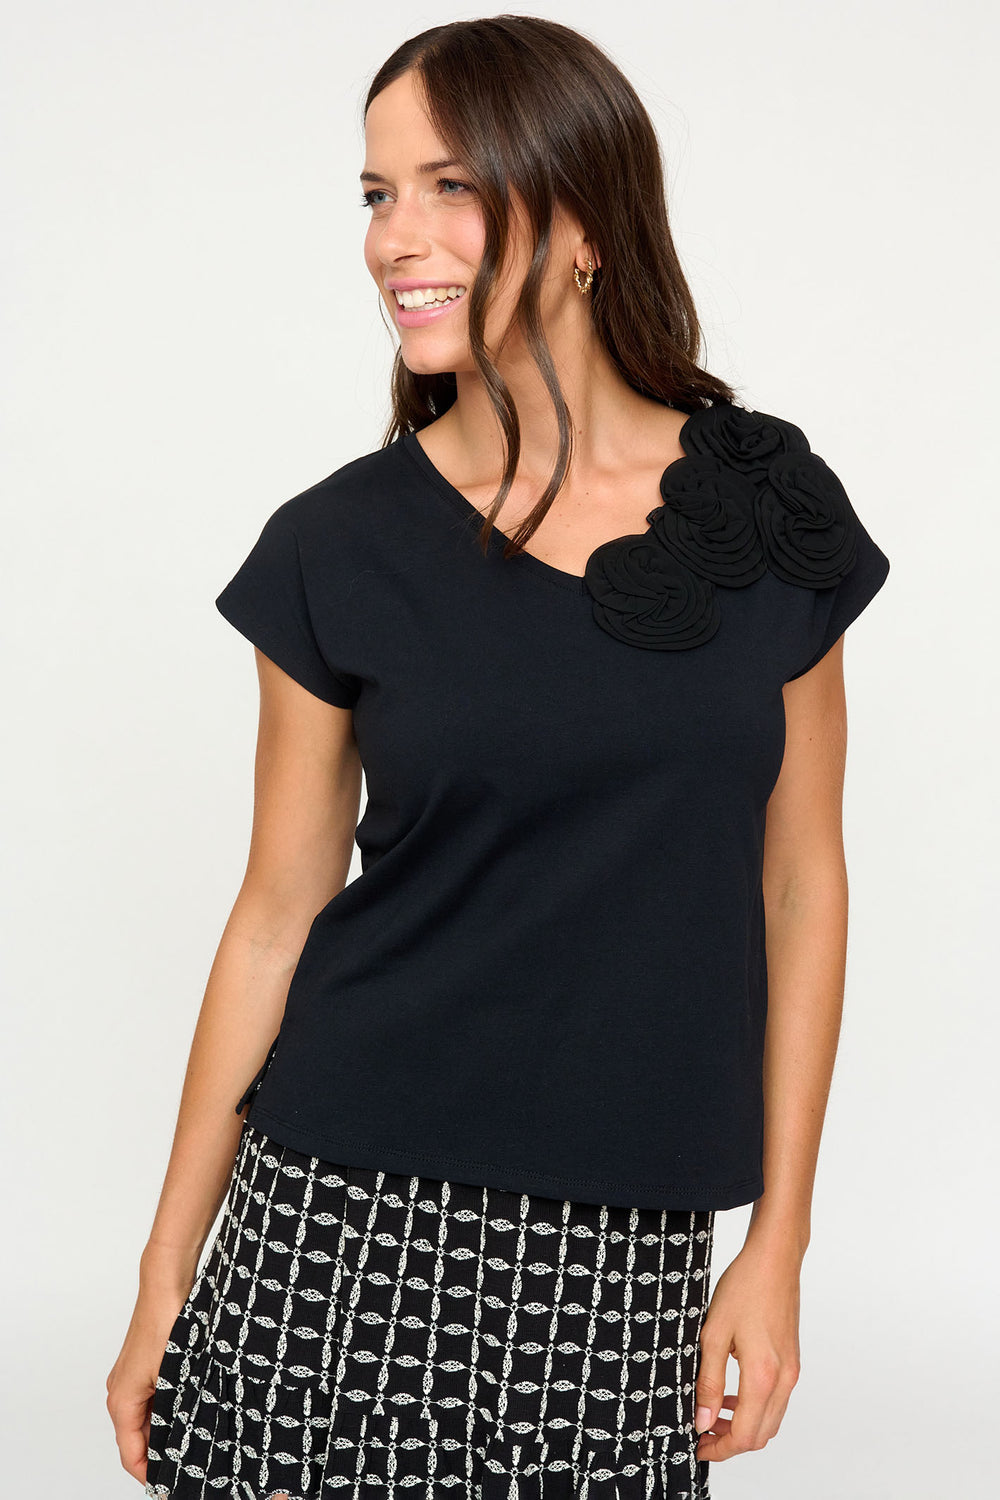 Bariloche Hinojales Black V-Neck Cap Sleeve Top - Rouge Boutique Inverness